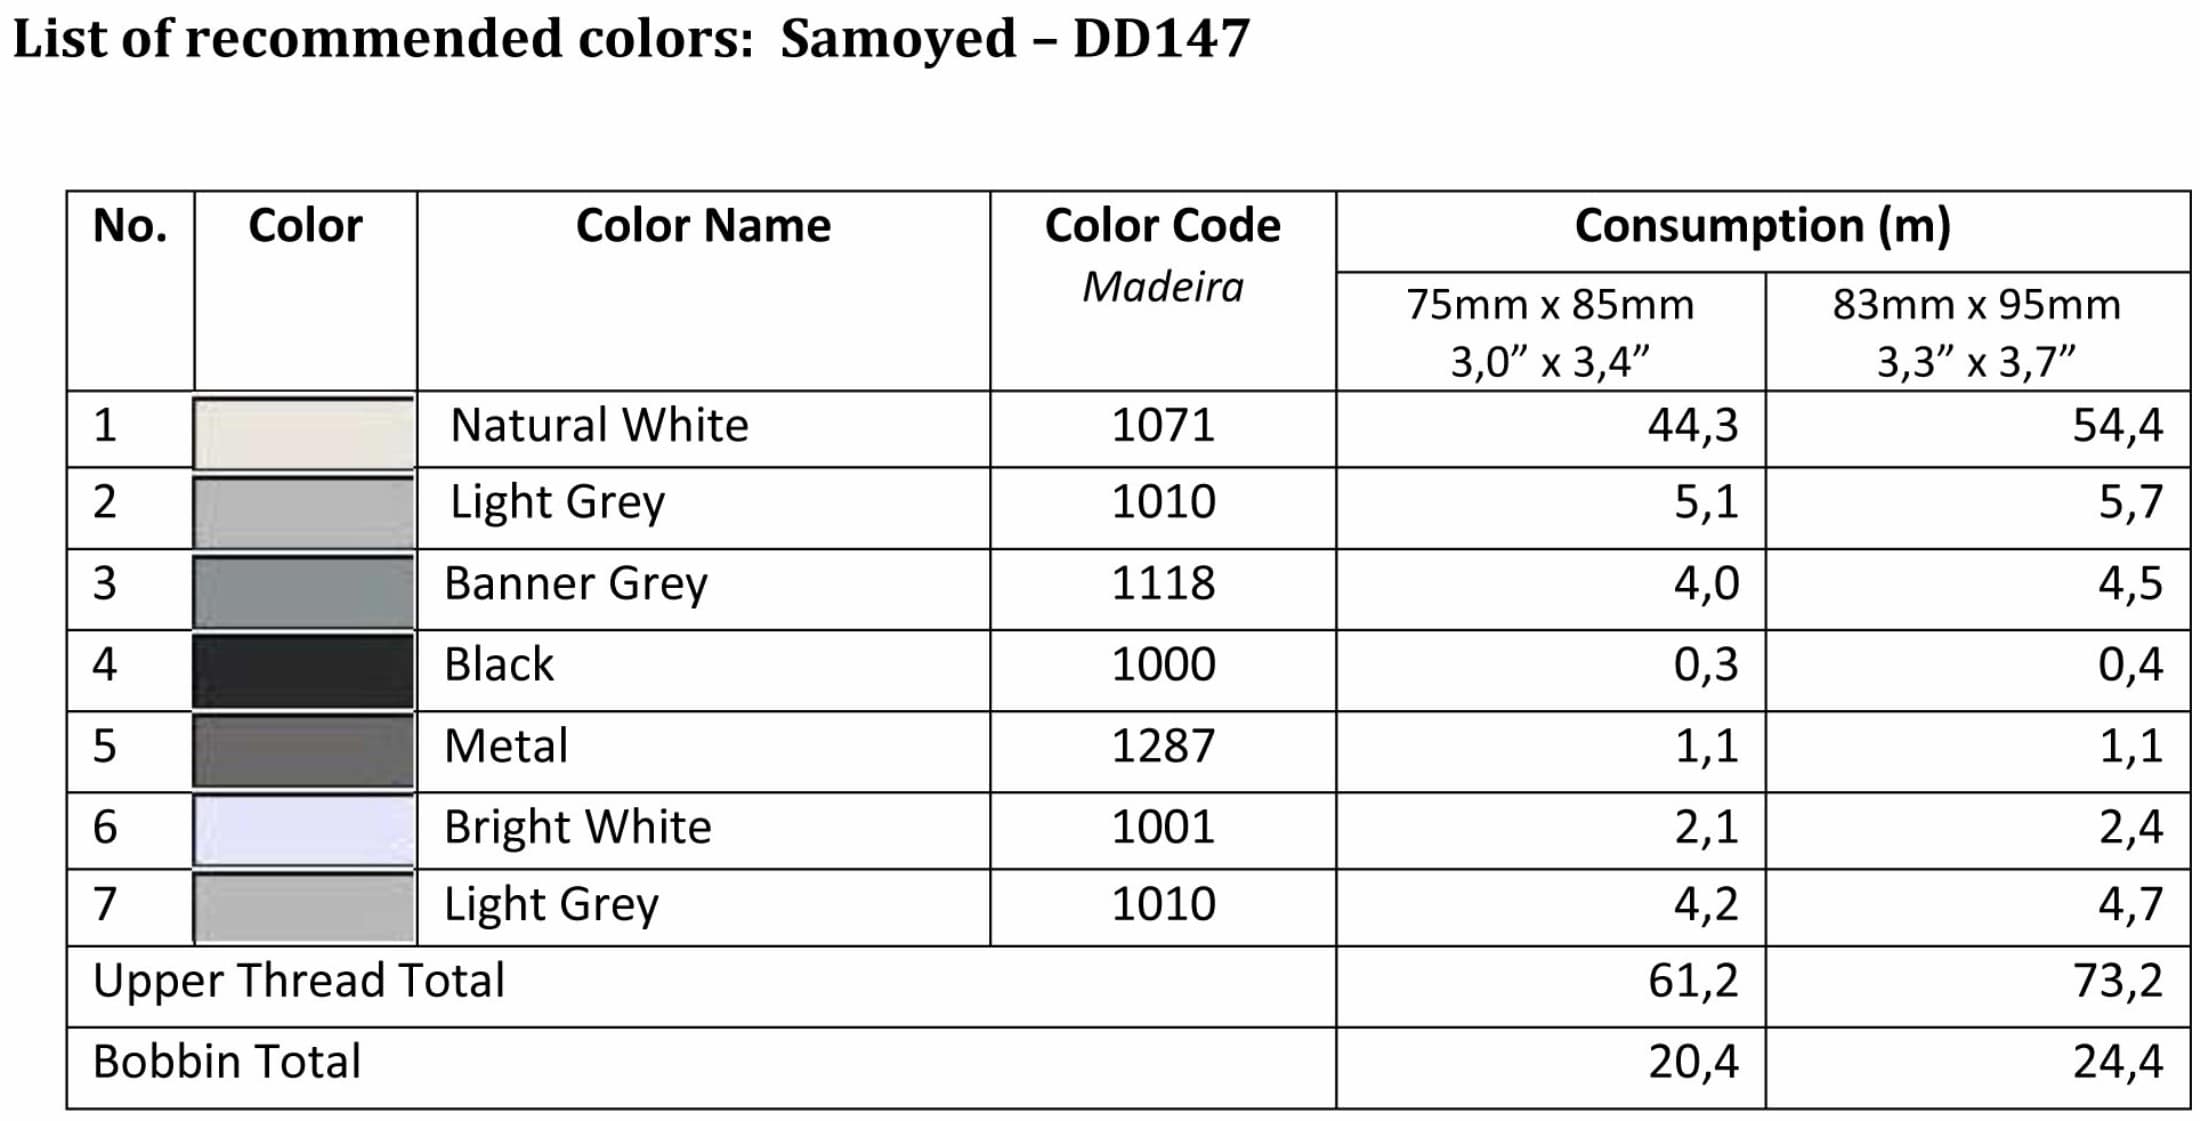 List of recommended colors - LargeDD147